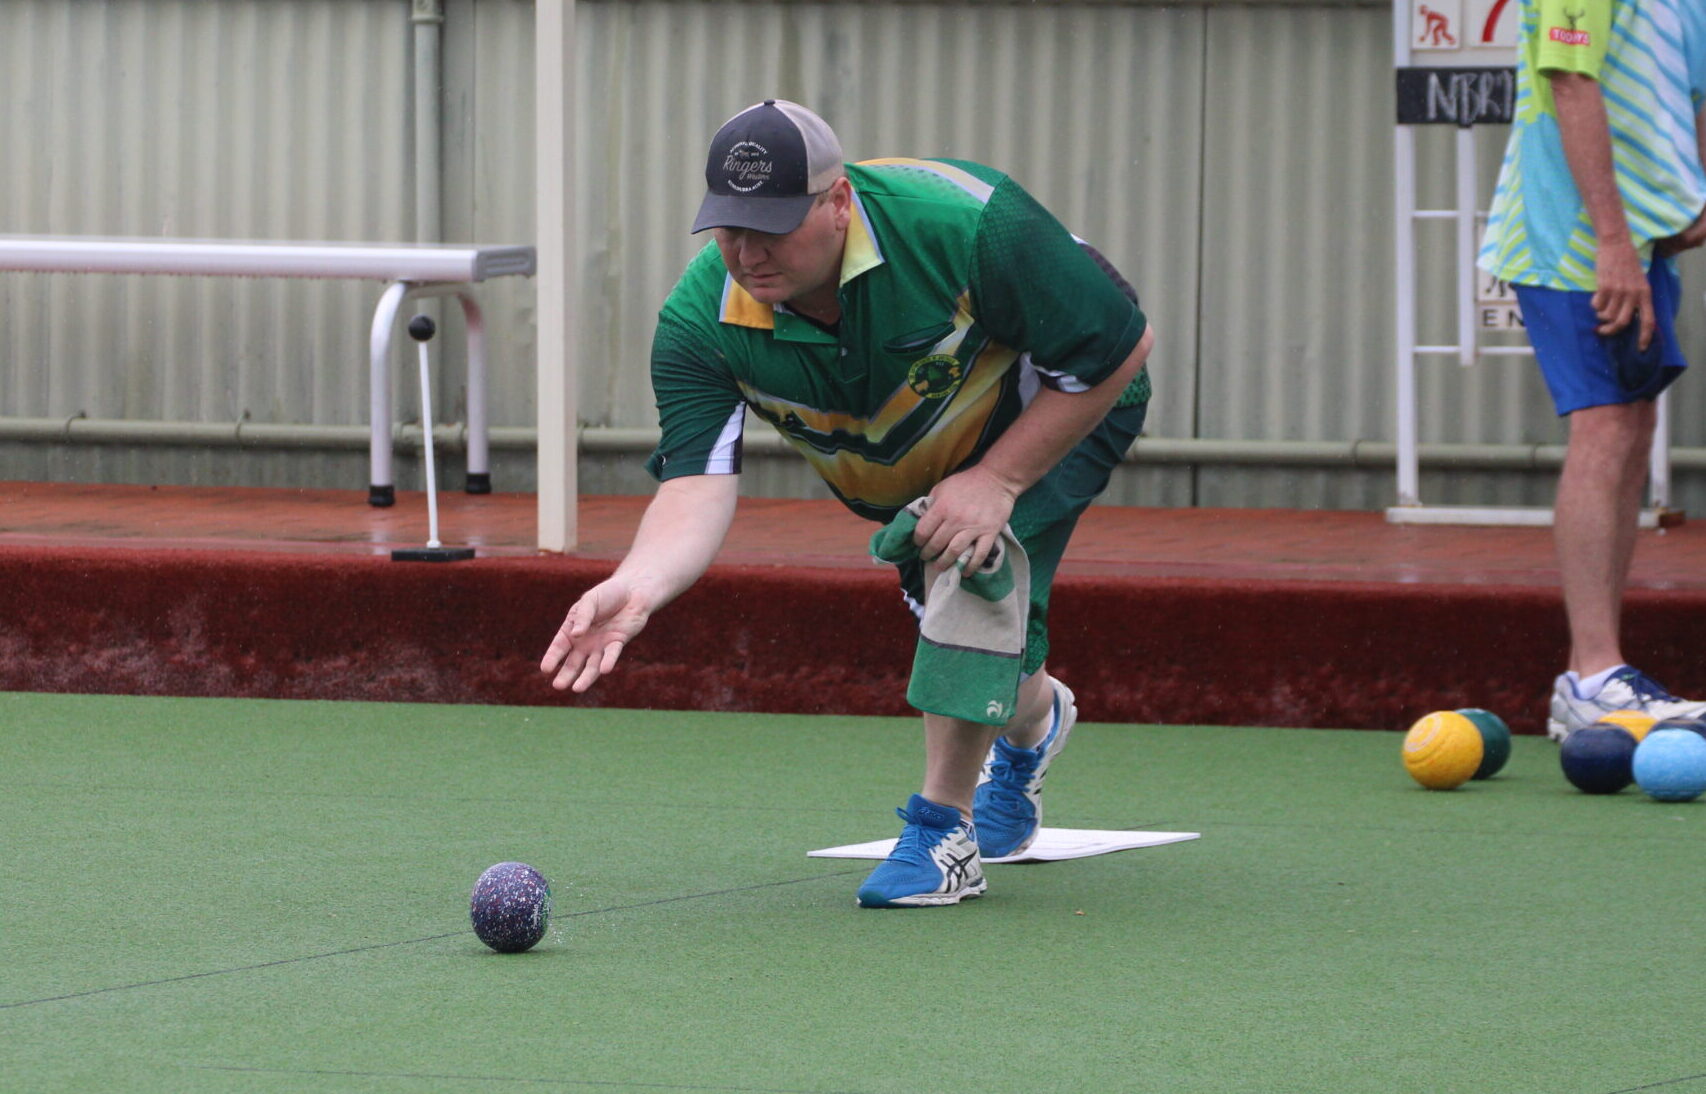 Wee Waa Bowling Club to host Zone 3 Bowls State Triples sectional play